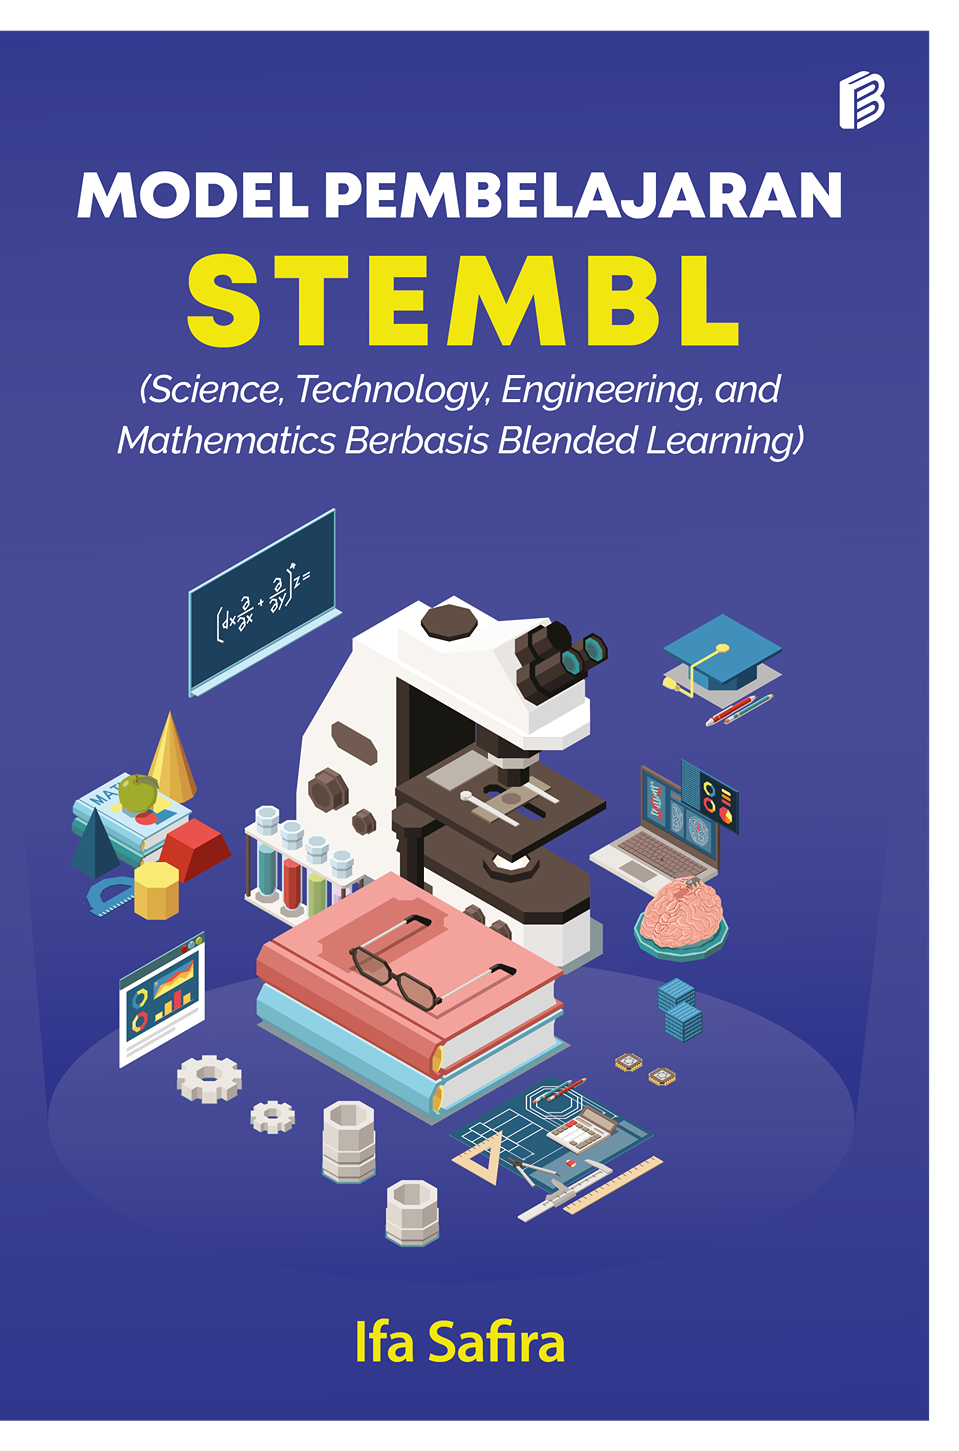 cover/(14-10-2022)model-pembelajaran-stembl-(science-technology-engineering-and-mathematics-berbasis-blended-learning).png